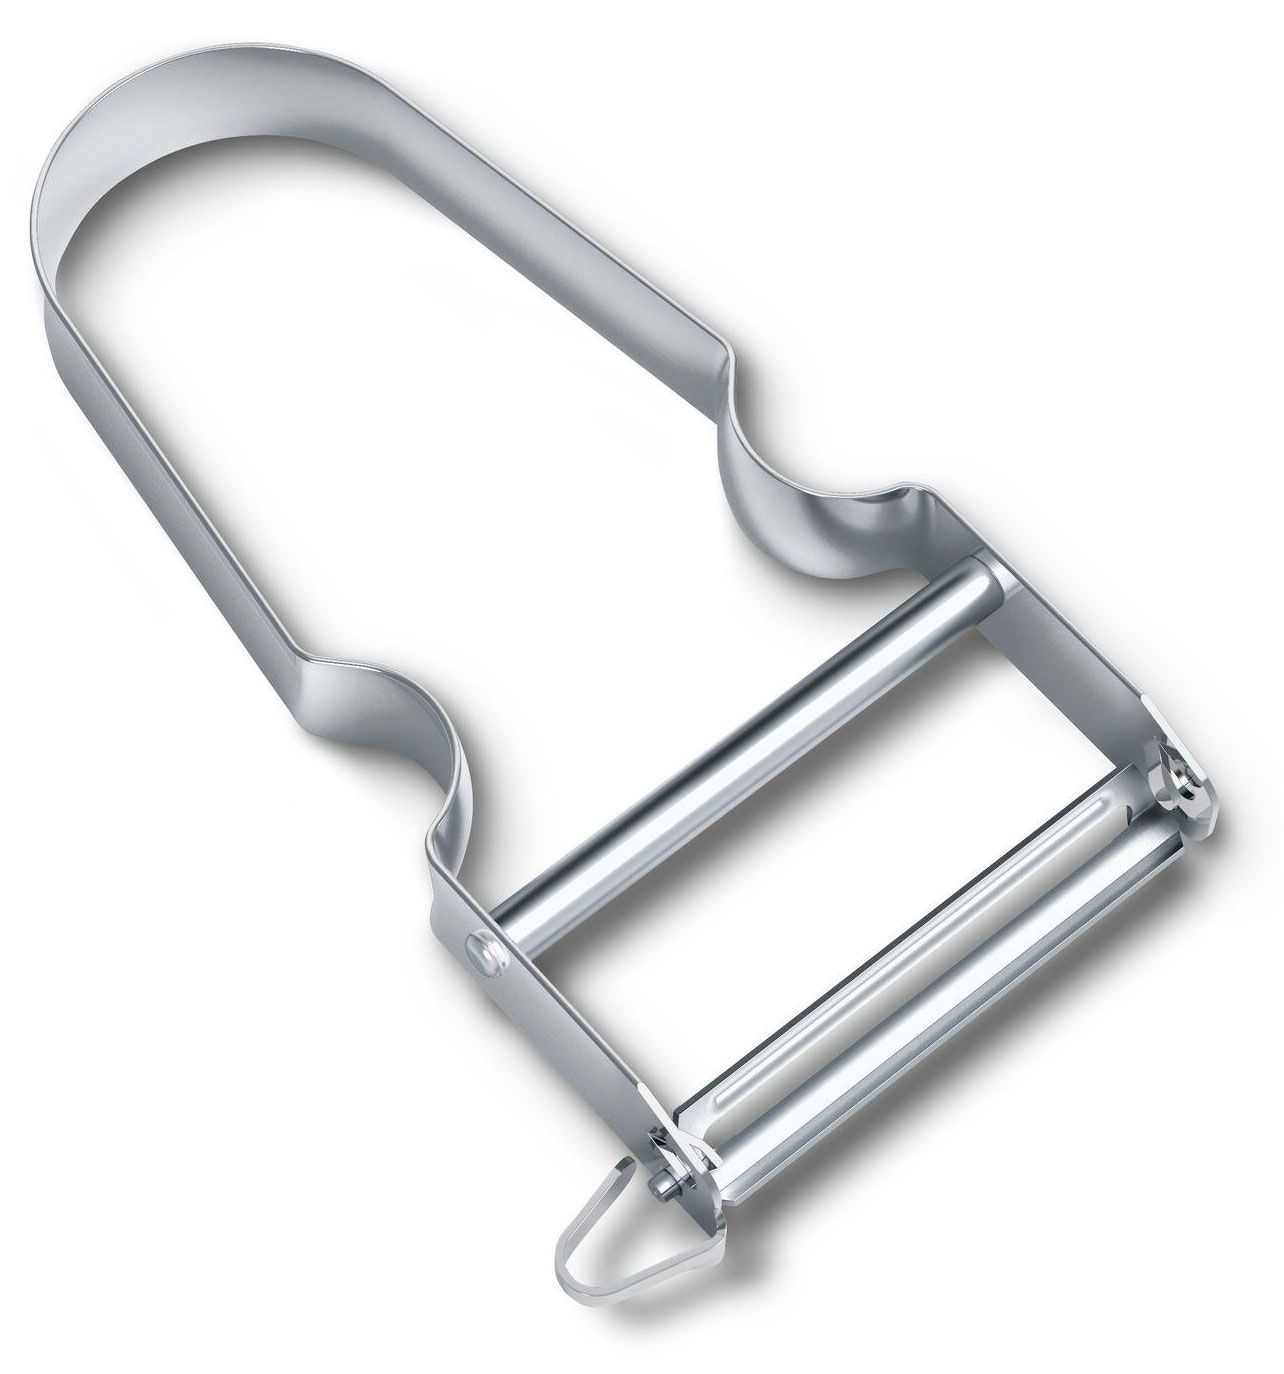 Essential to You 174411991 Peeler, Silver